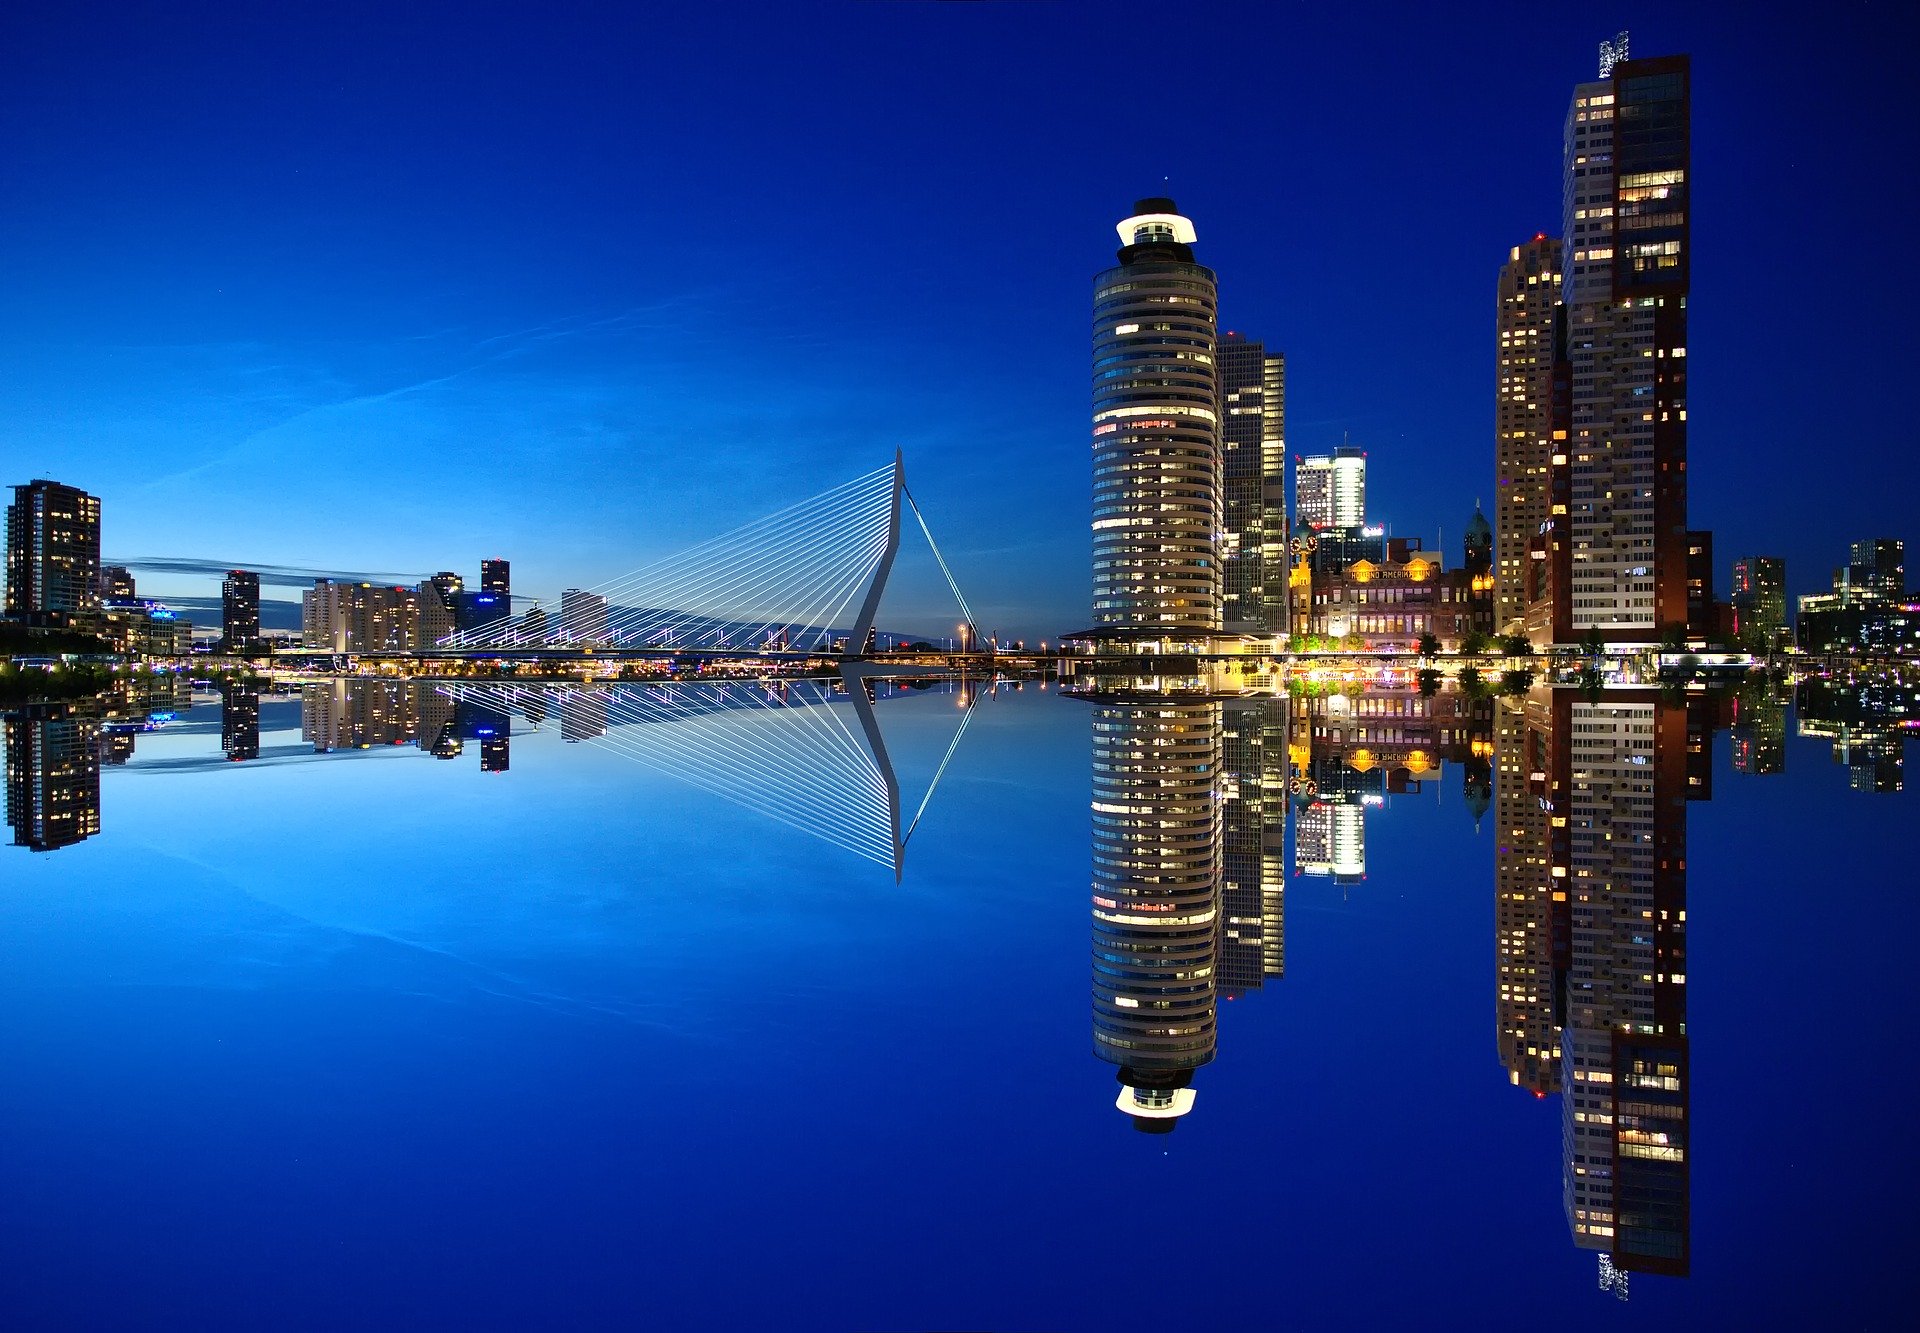 Rotterdam skyline, a beautiful image that inspires all kinds of ideas for content.